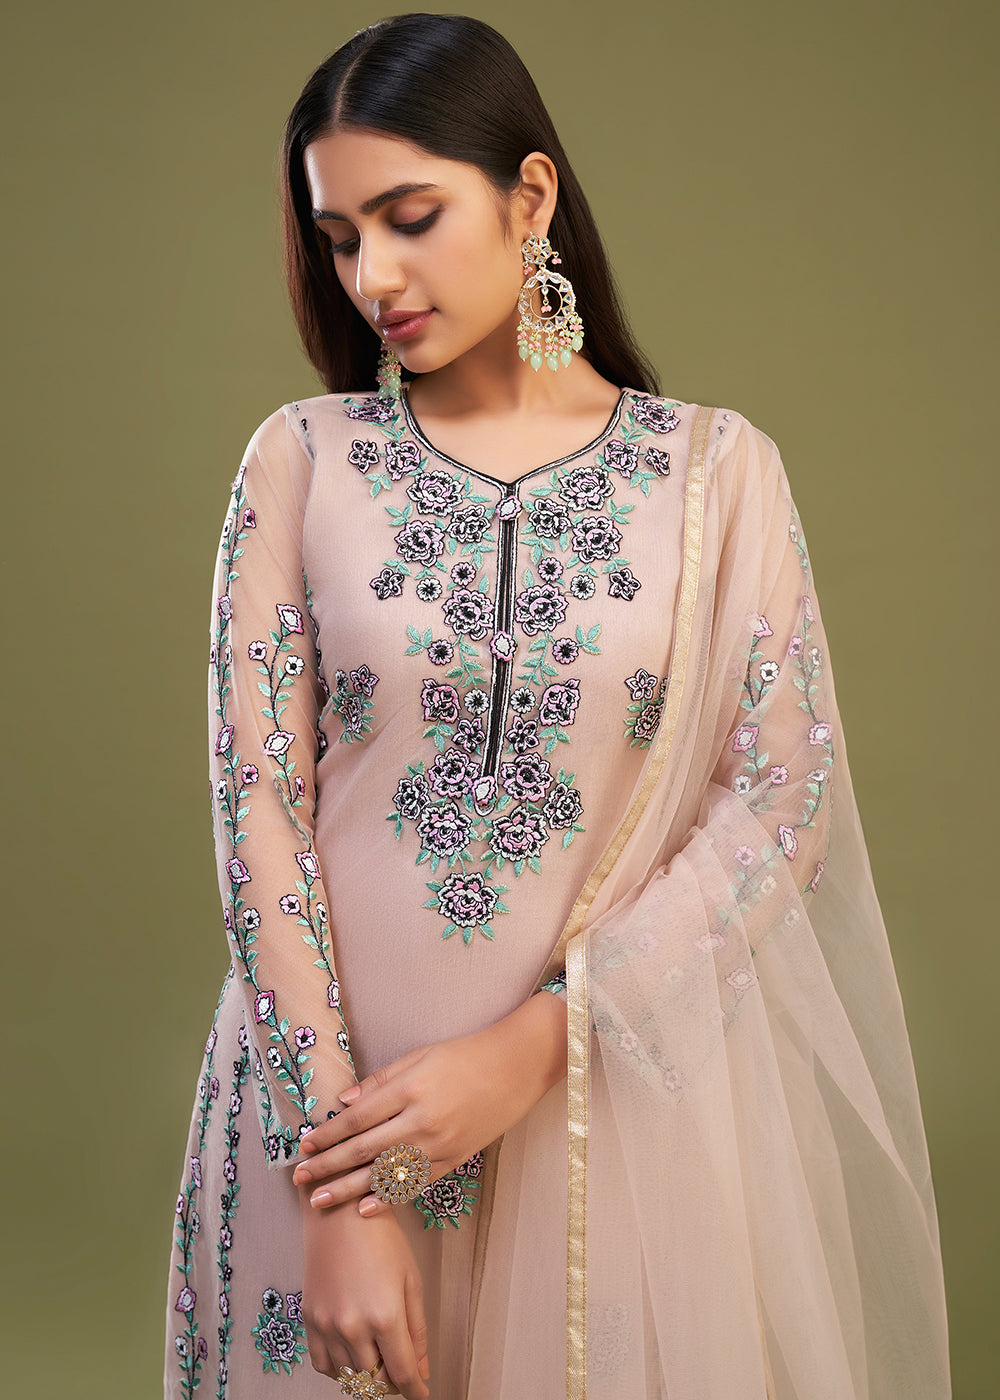 Buy Now Peach Multi Thread Embroidered Net Salwar Suit Online in USA, UK, Canada, Germany, Australia & Worldwide at Empress Clothing.